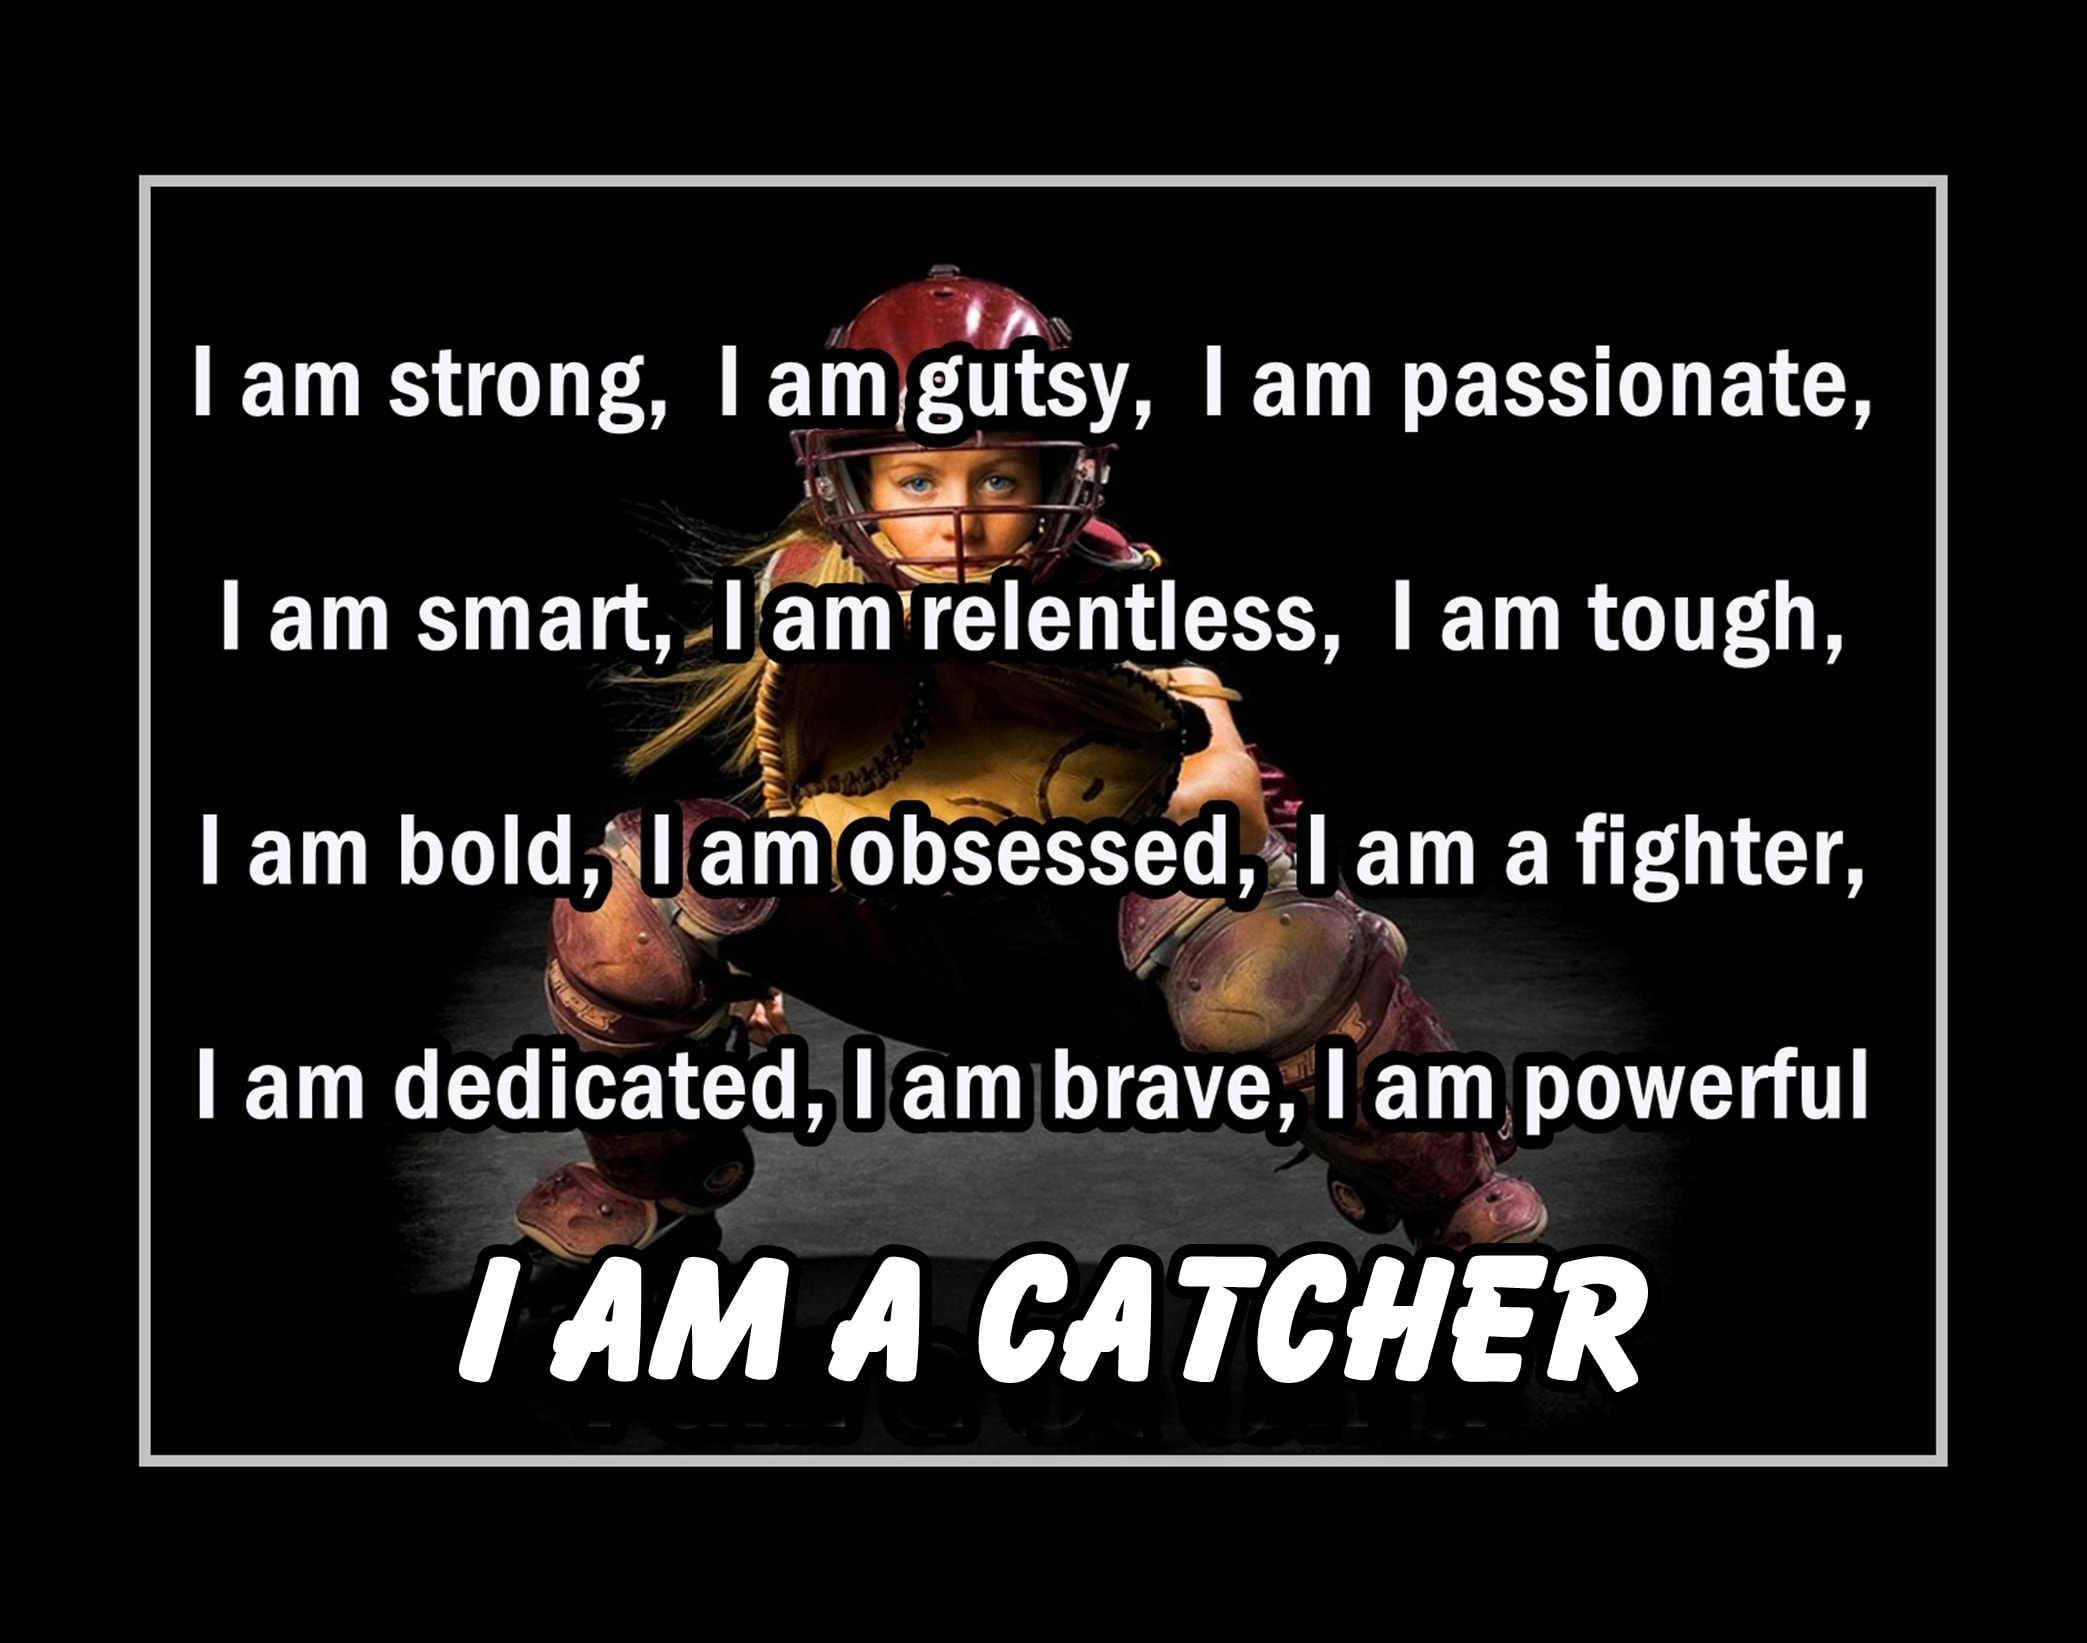 6 Inspiring Softball Quotes to Boost Your Confidence